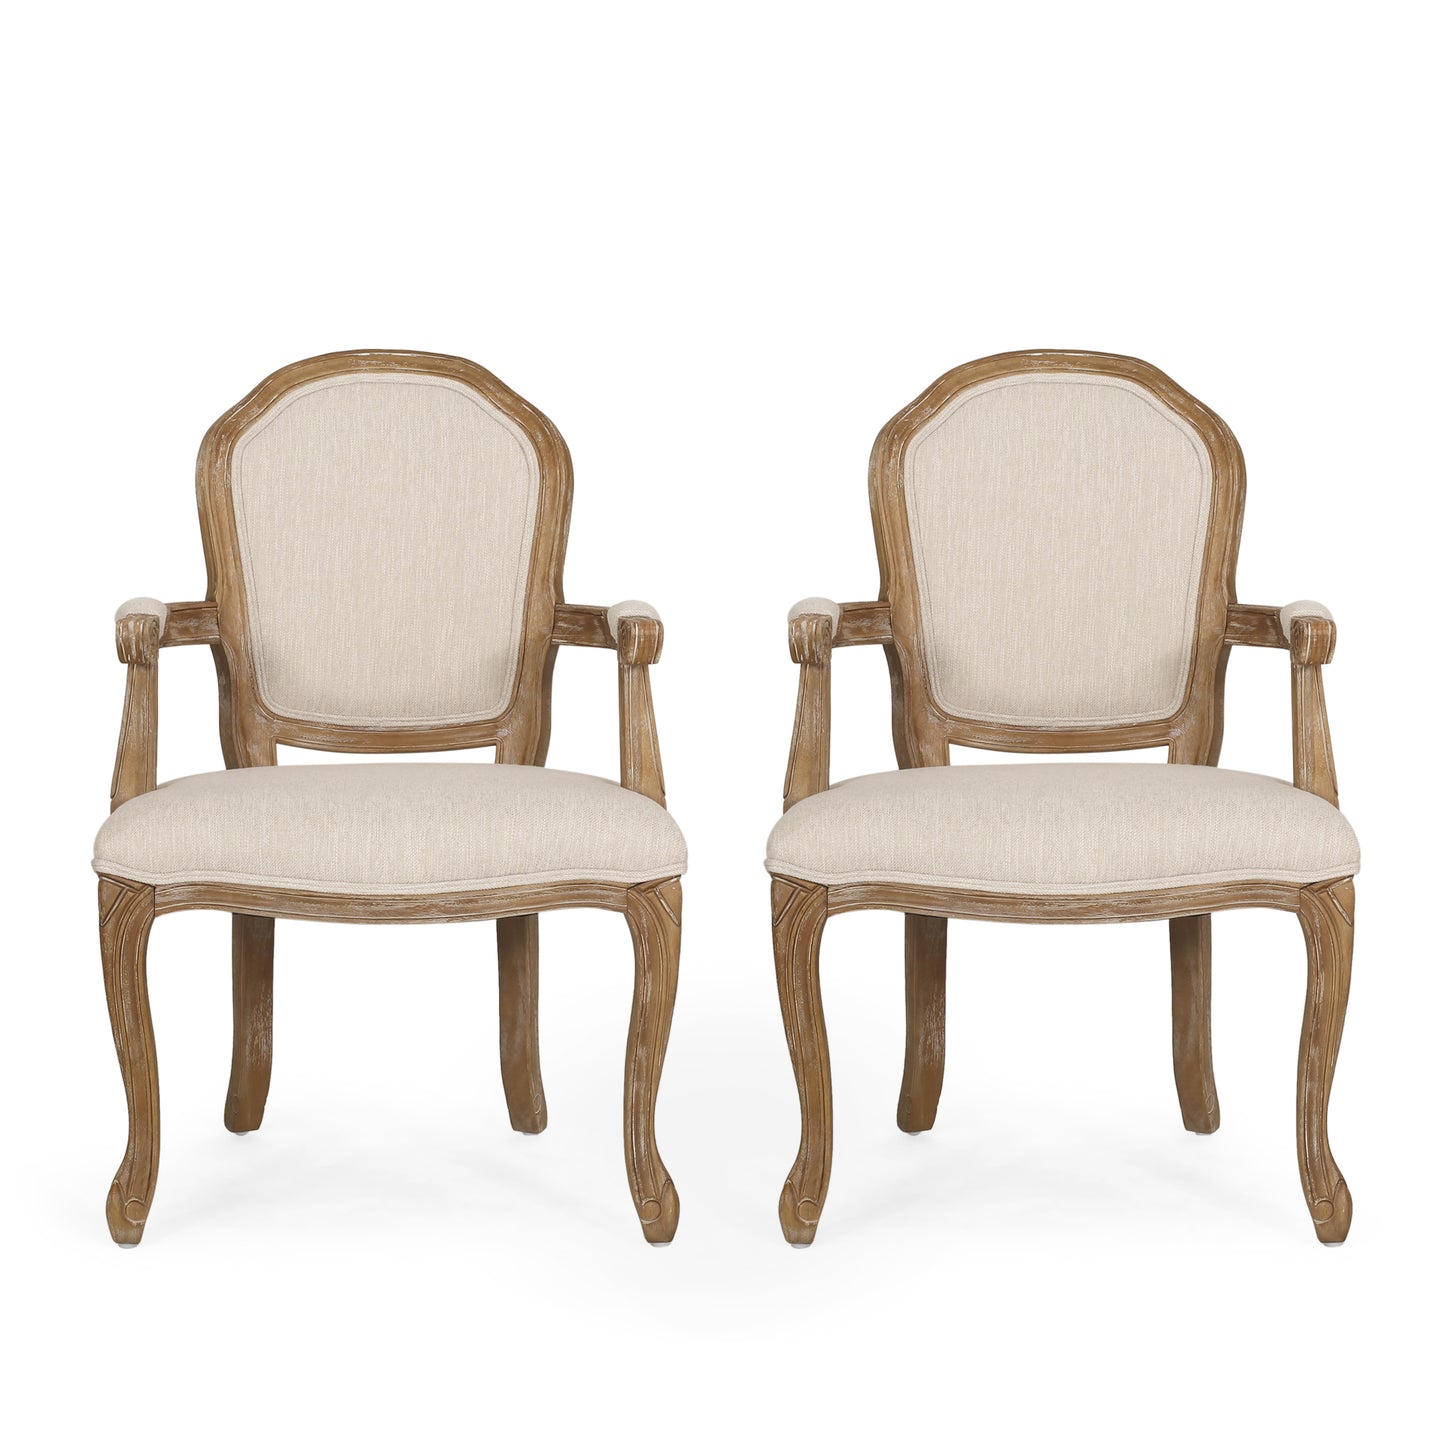 Fairgreens Traditional Upholstered Dining Chairs, Set of 2